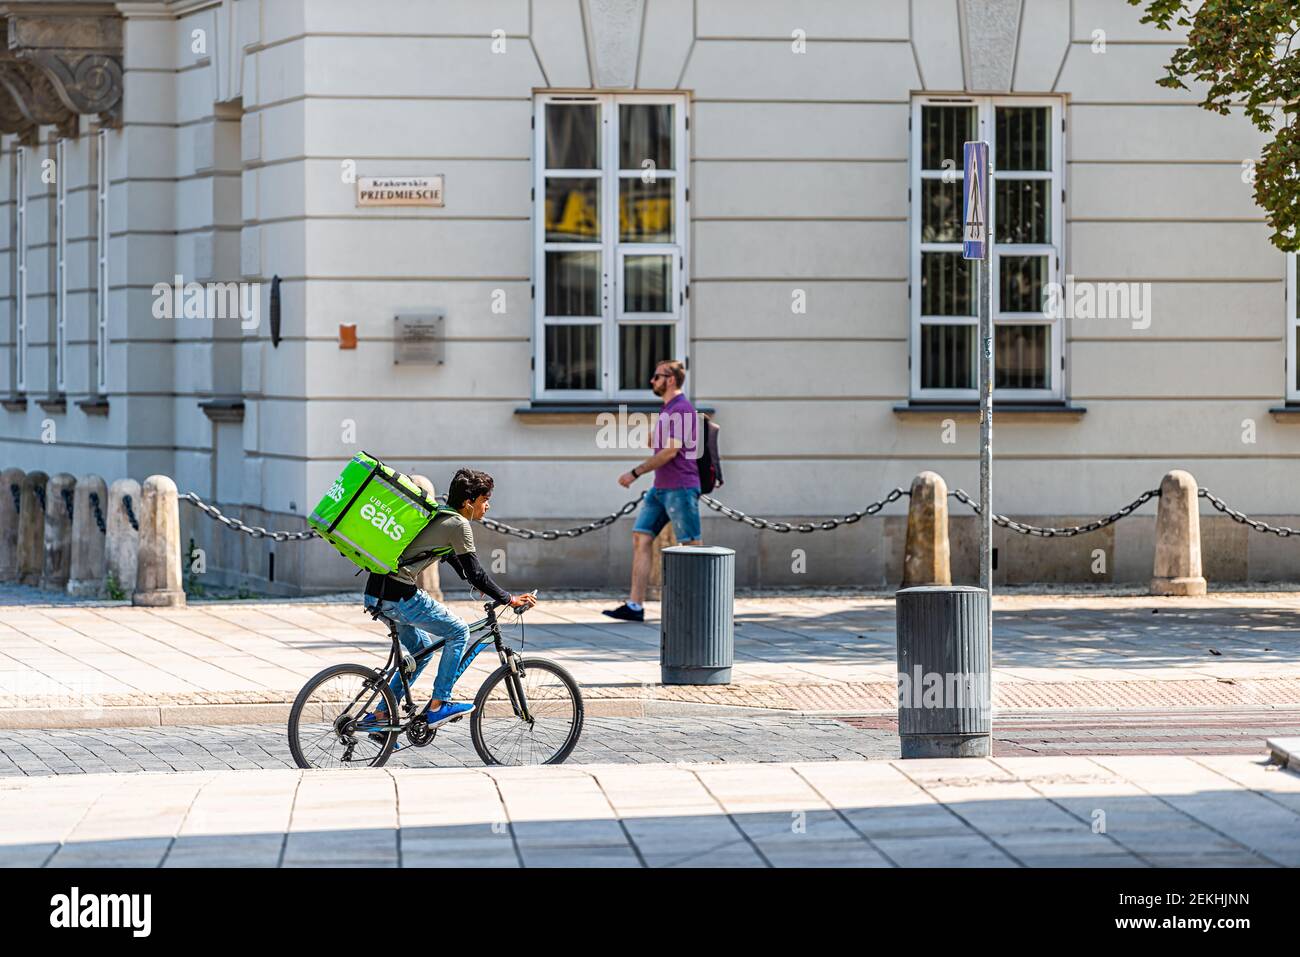 Warsaw, Poland - August 23, 2018: Uber eats bicycle man person with green sign in old town historic street in capital city during sunny summer day Stock Photo